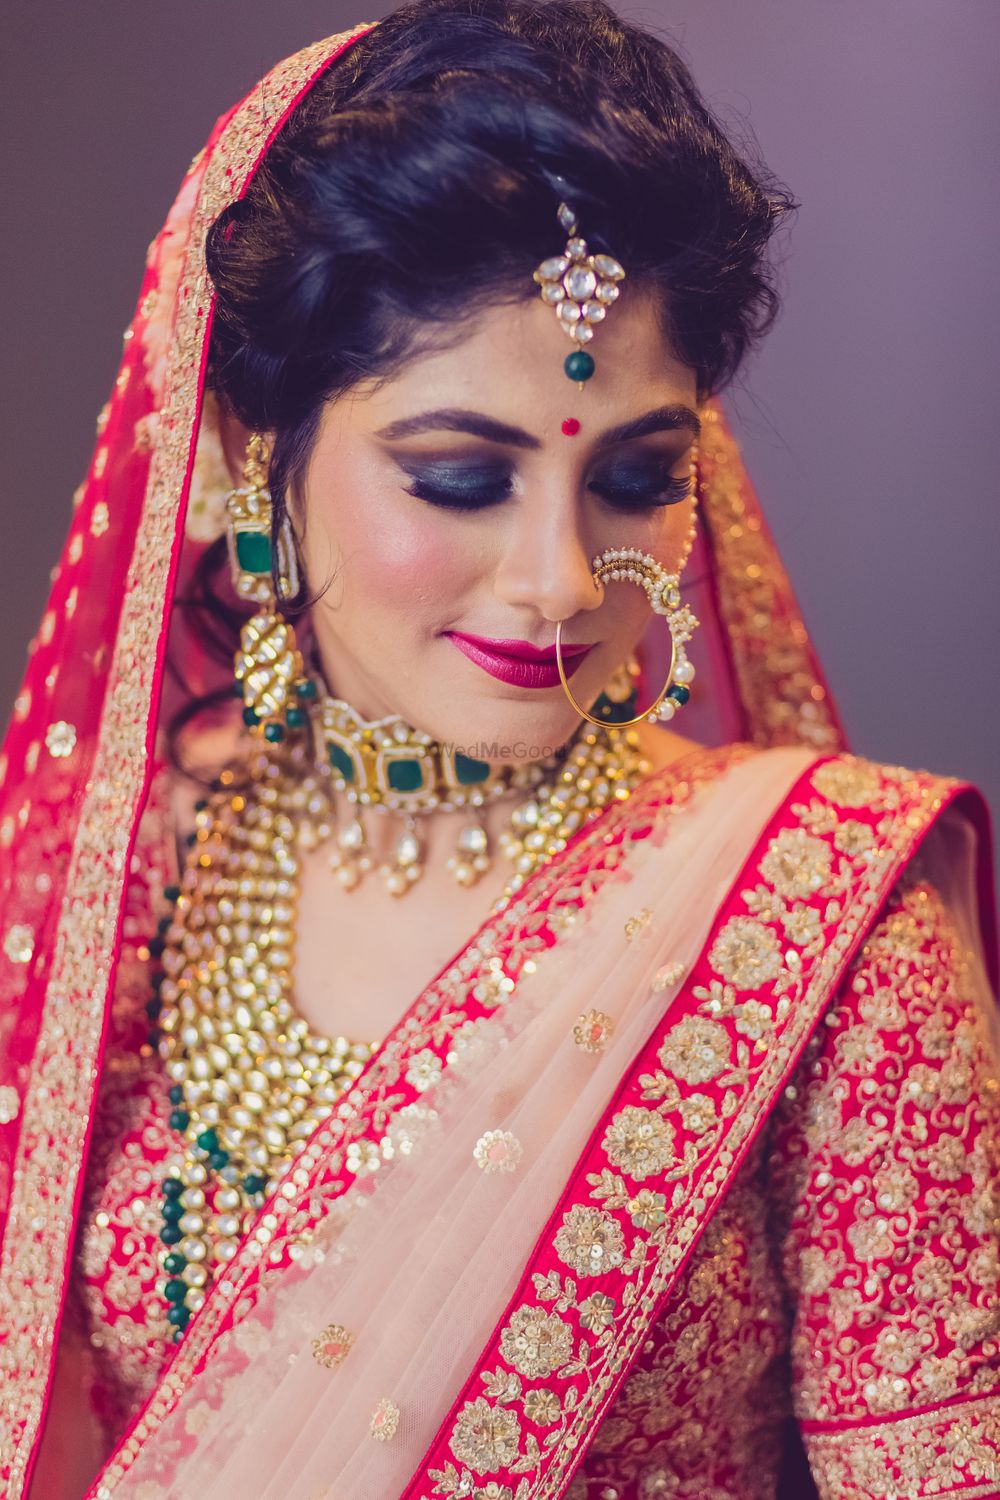 Photo From North Indian Bride_ Shikha on her wedding day - By Nivritti Chandra